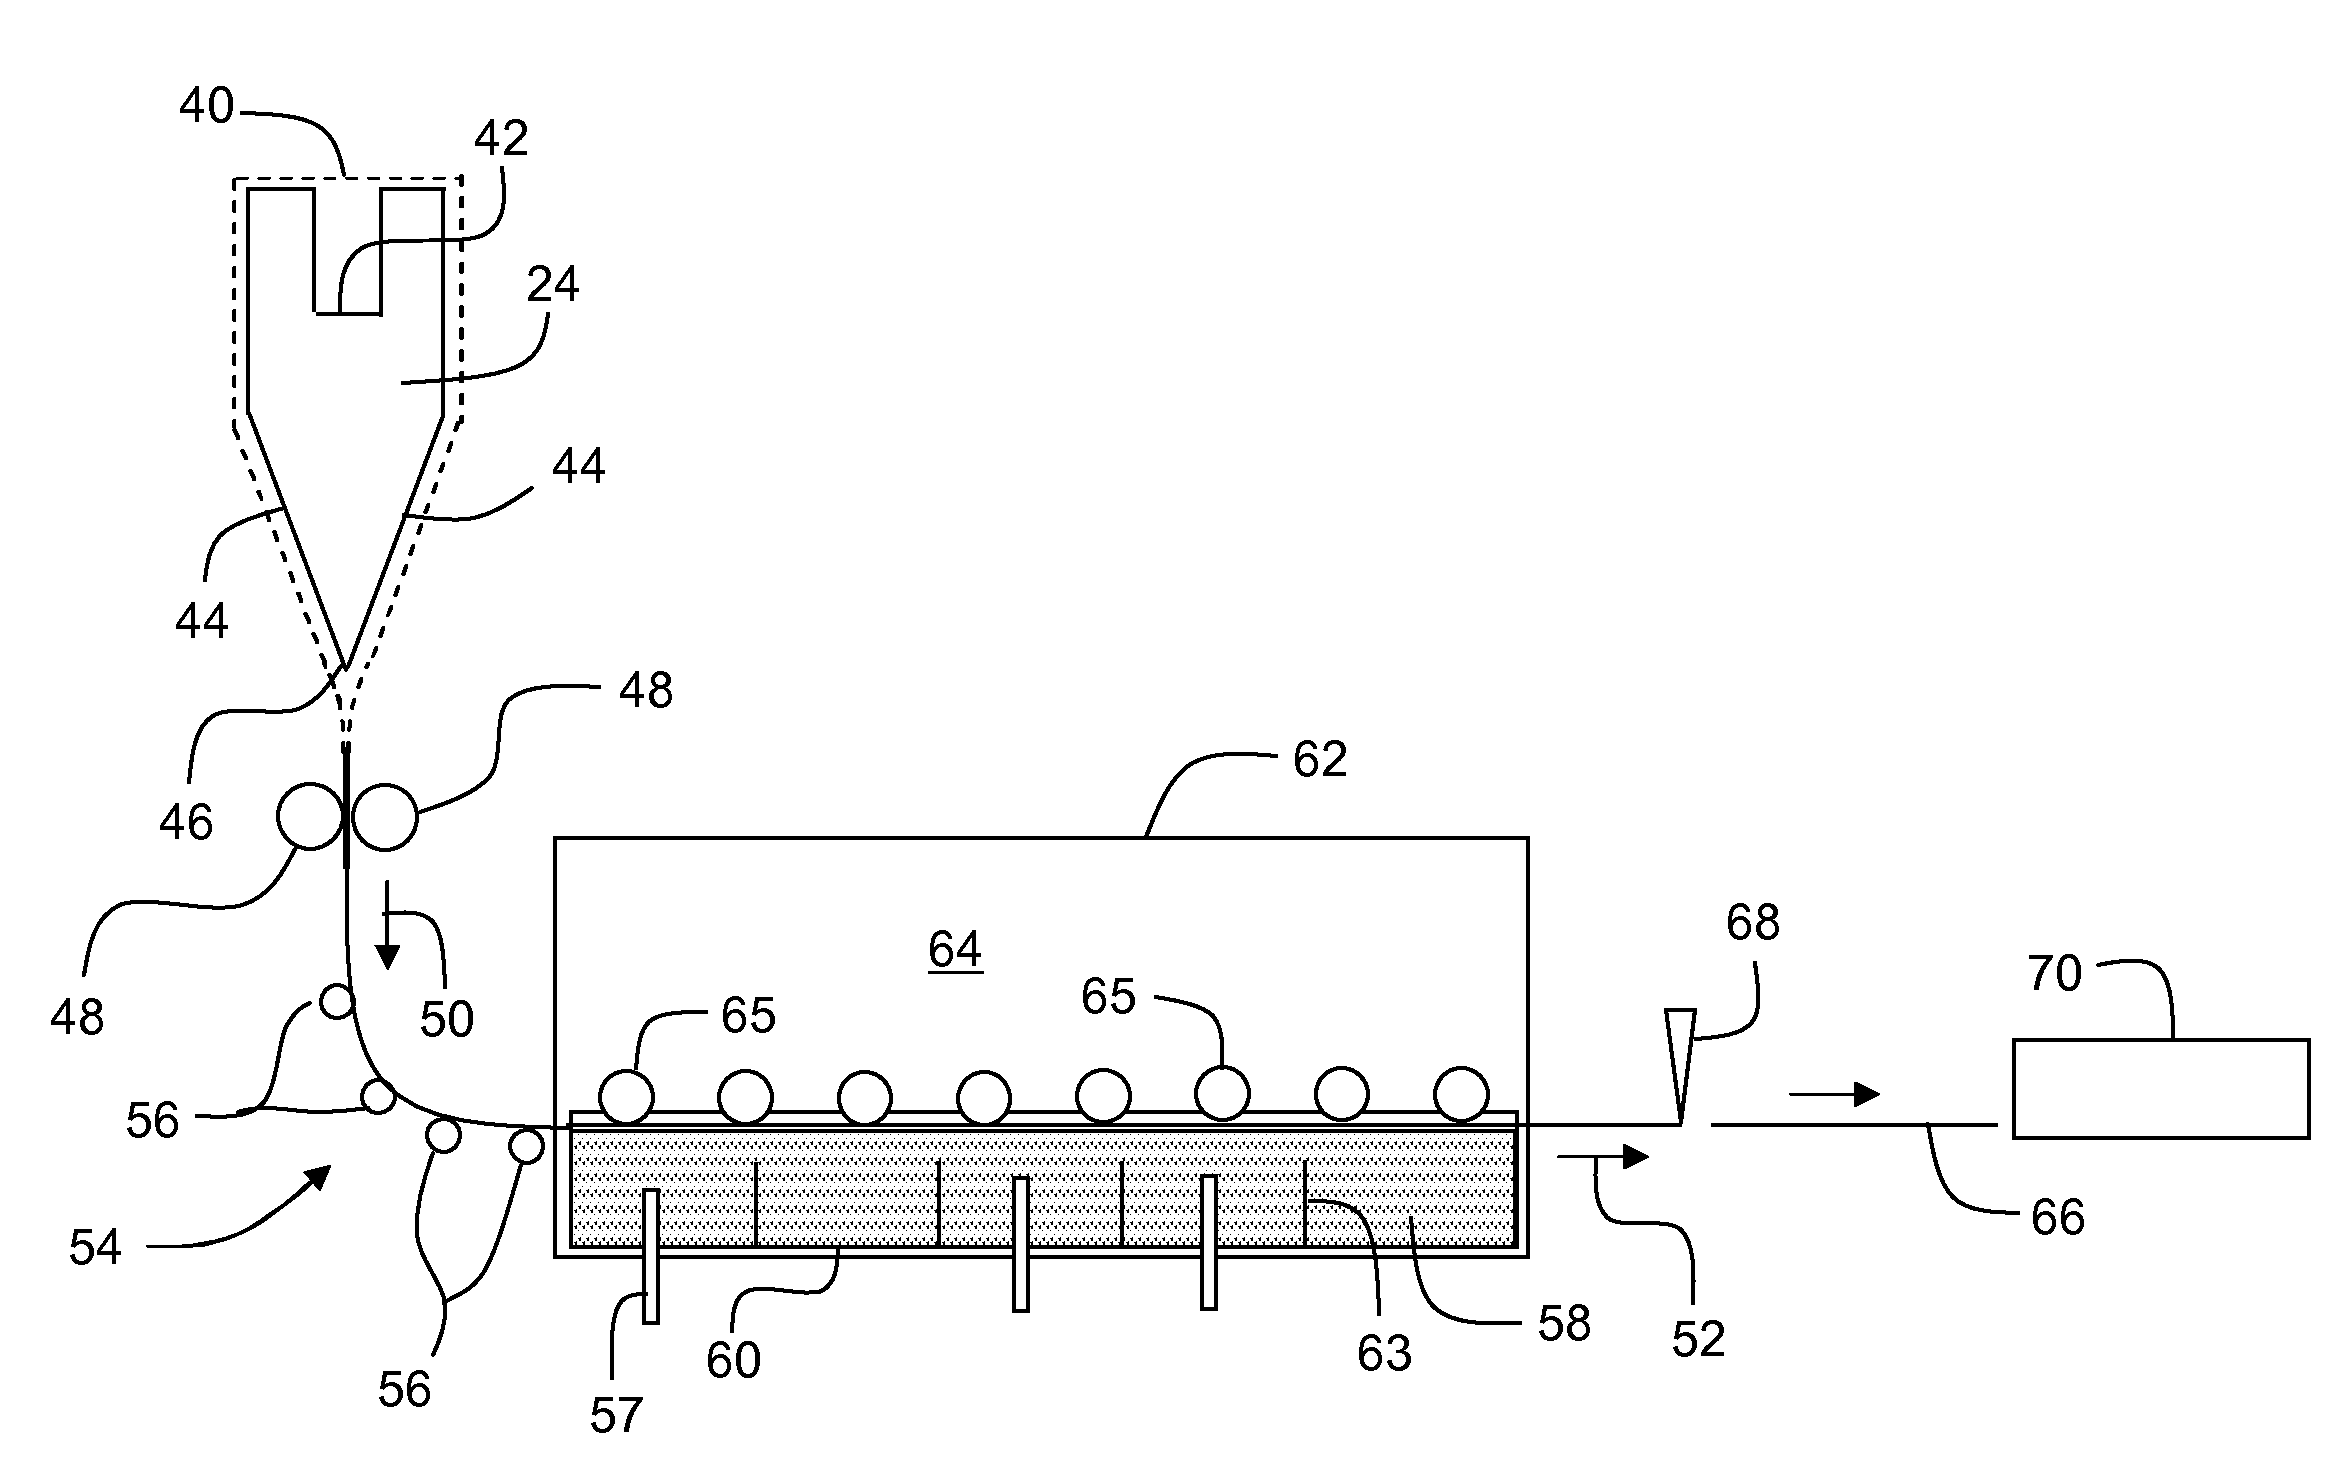 Apparatus and method for forming glass sheets